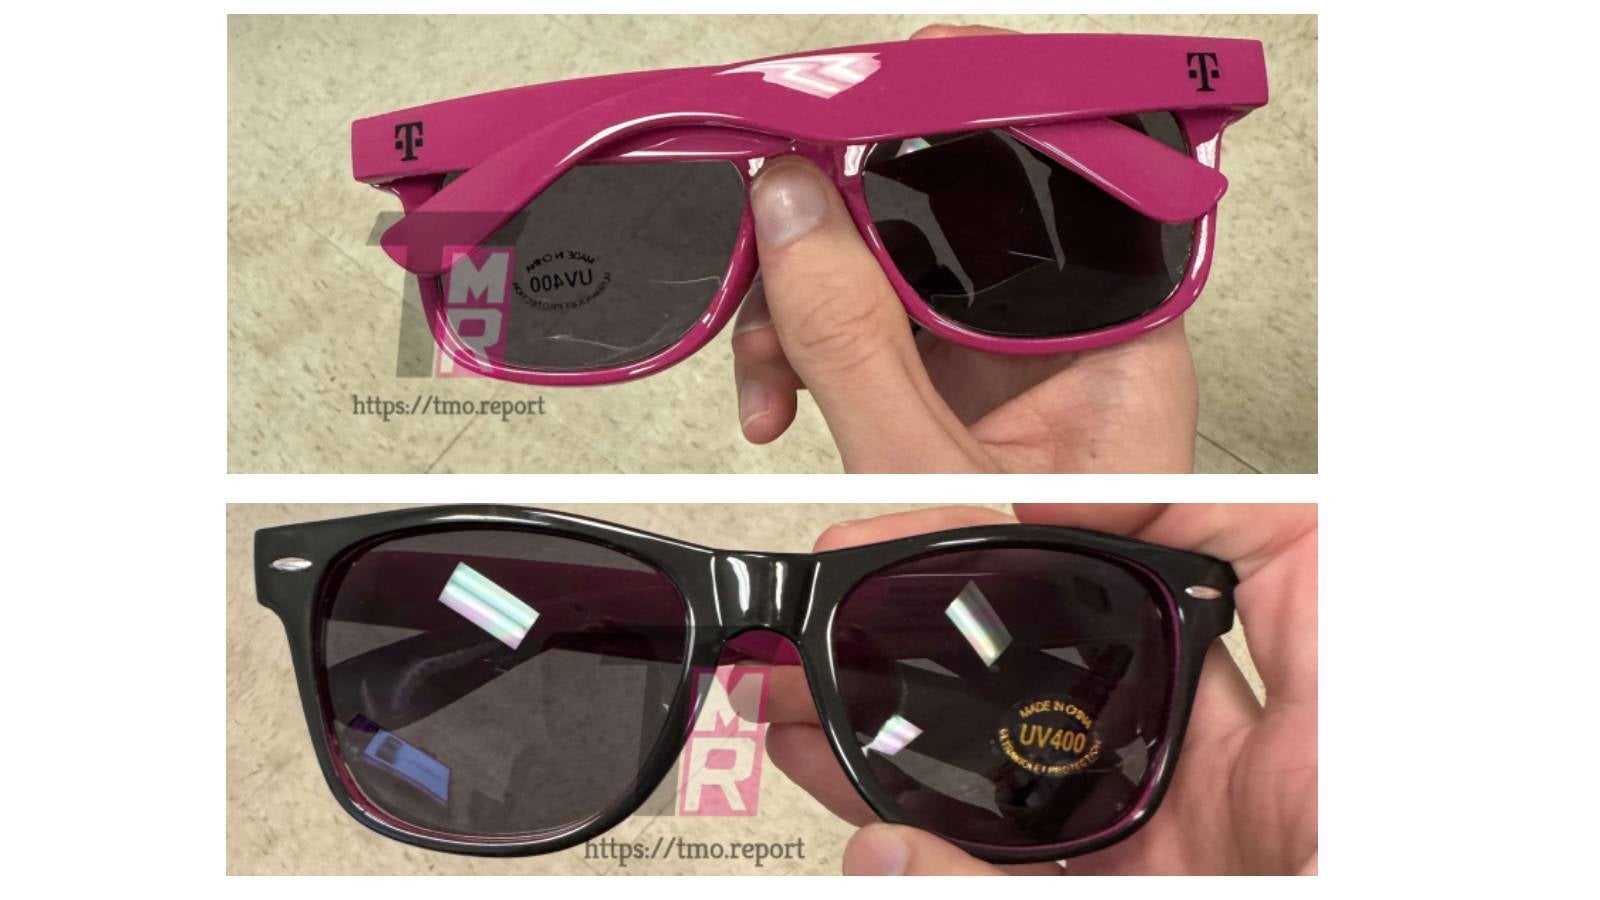 Leaked photo of the sunglasses T-Mobile will send to its customers - A new T-Mobile freebie is coming your way soon - make sure you claim it in time